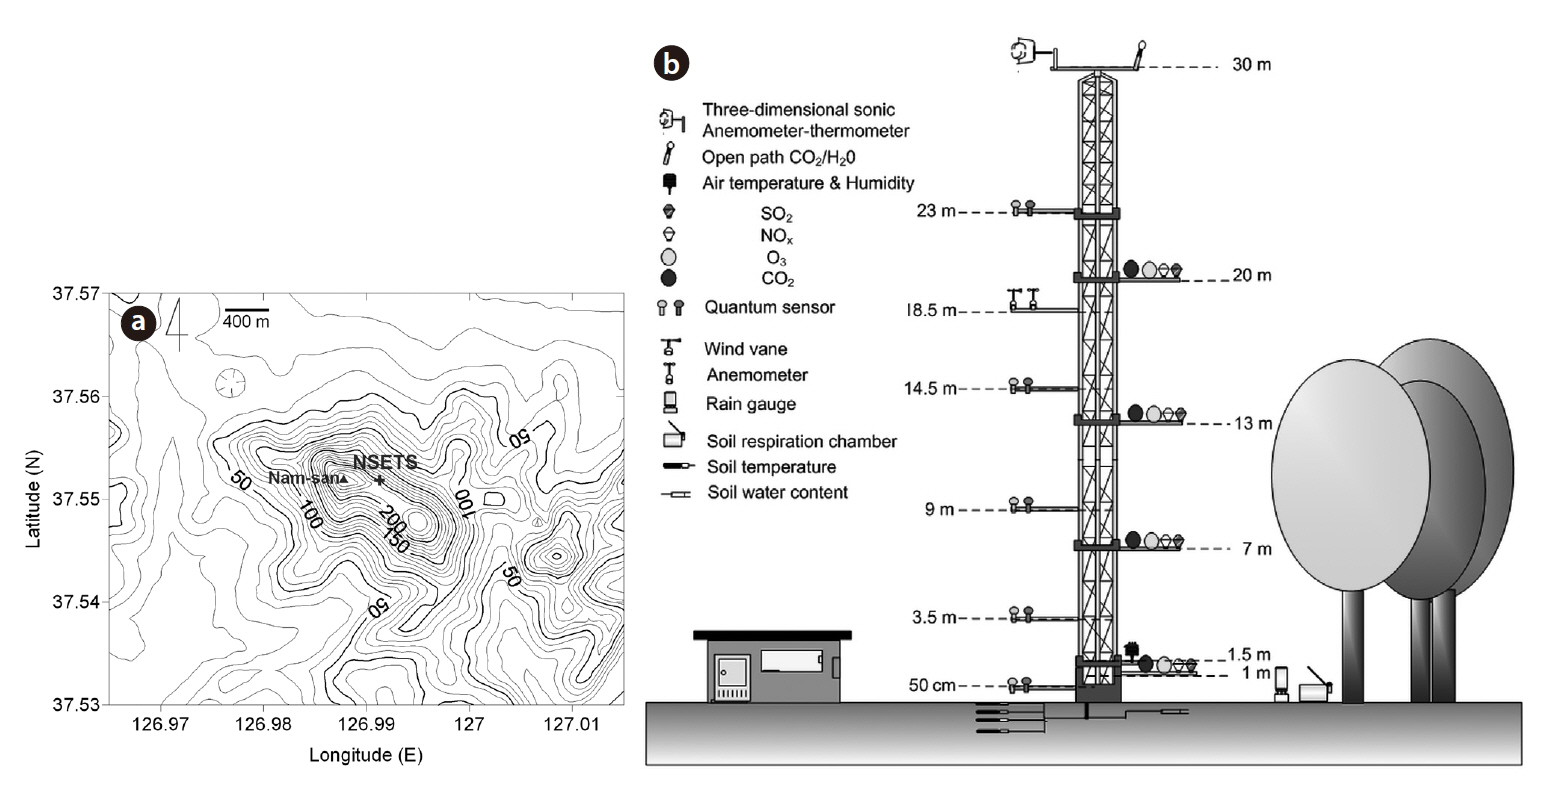 Topographic map of the area around the Namsan Ecological Tower Site (NSETS) located in the Seoul metropolitan area (a) and schematic diagram of the main monitoring instrumentation at the NSETS (b). The cross and triangle denote the location of the flux tall tower and the peak of Mt. Nam.